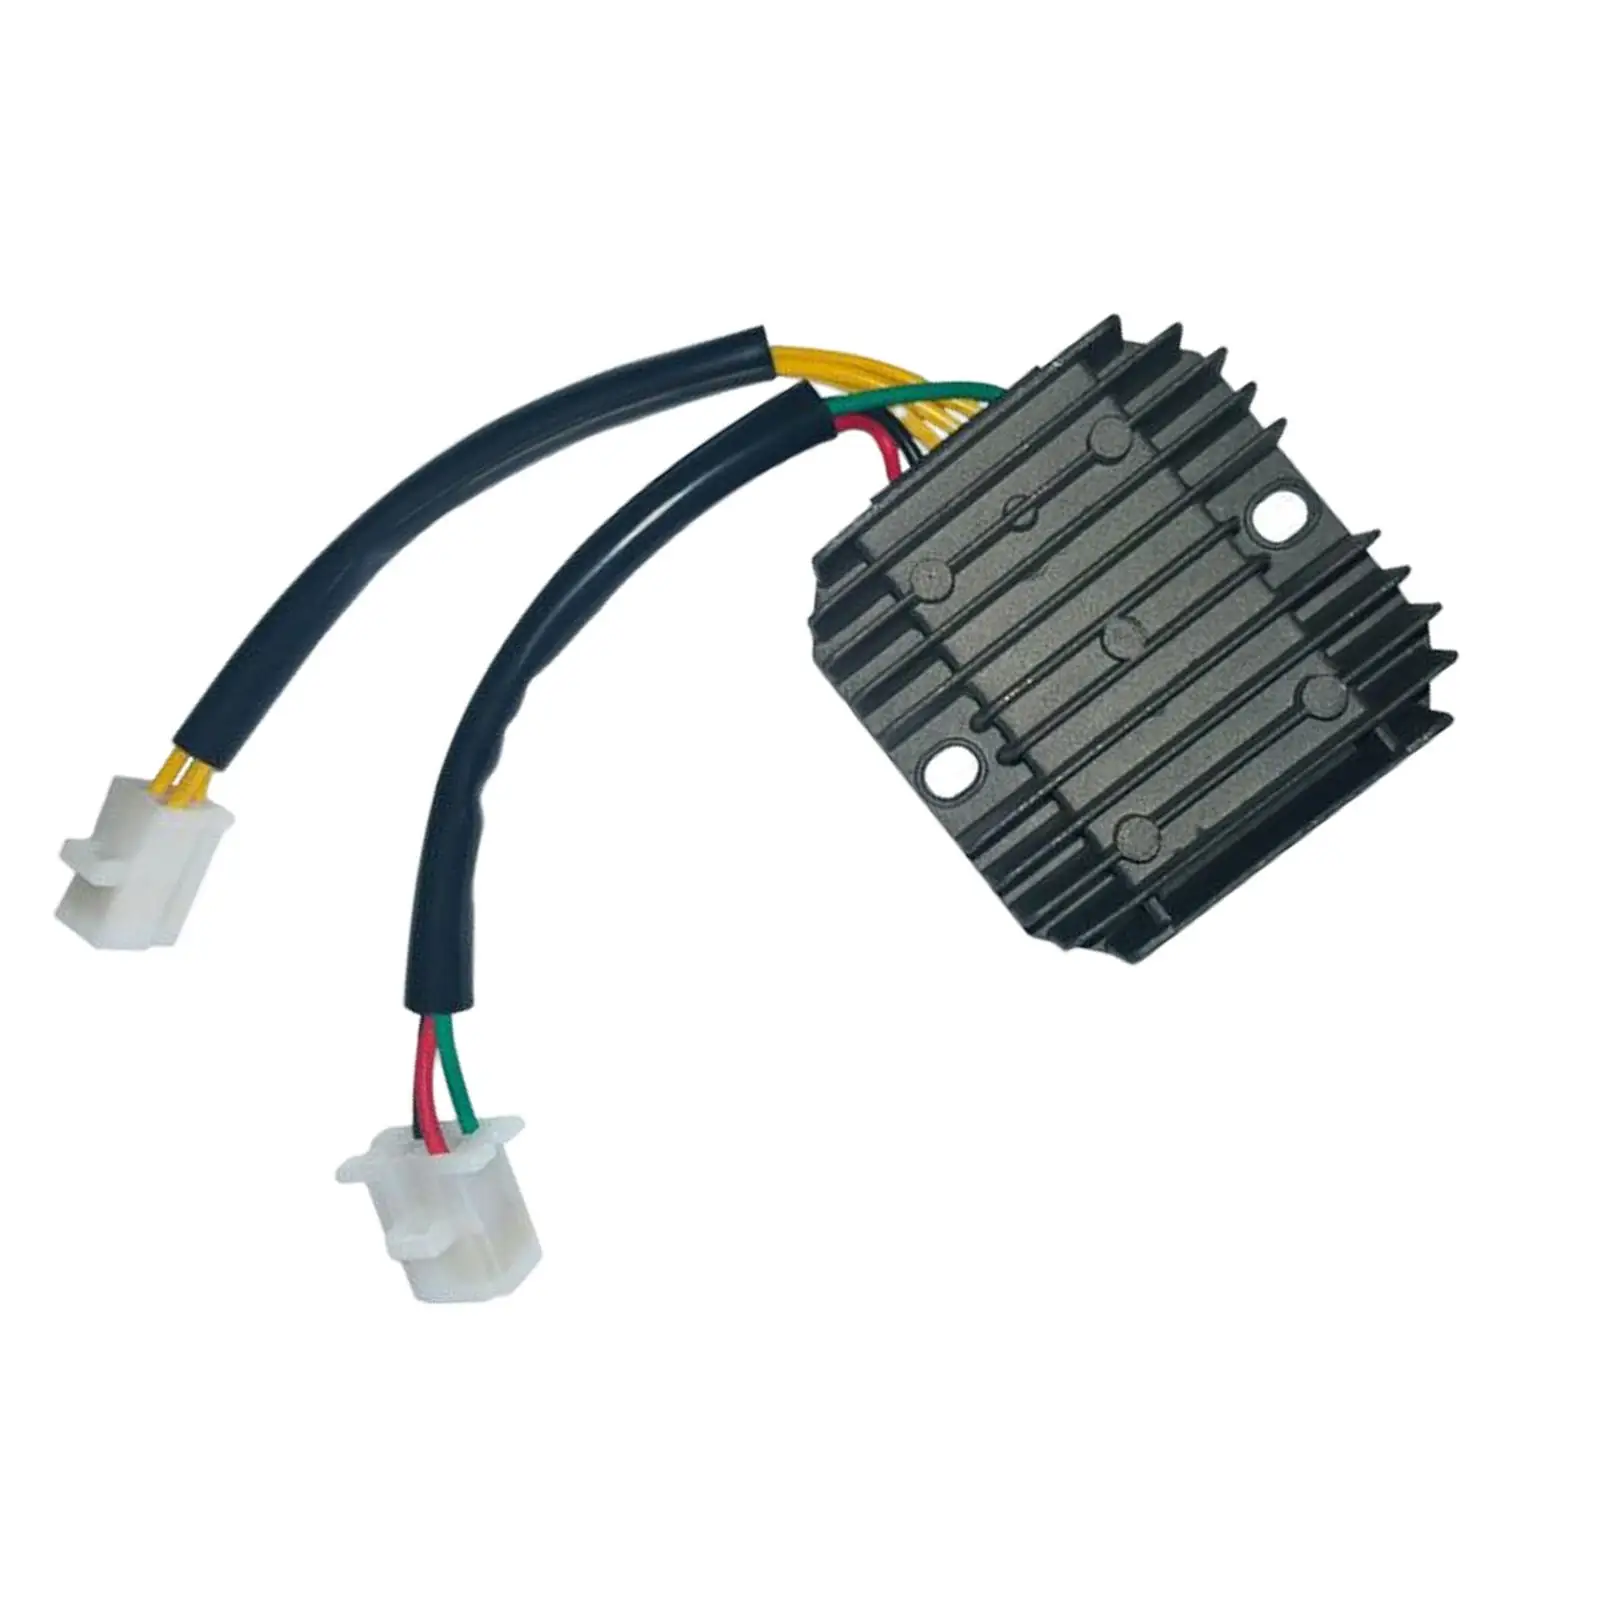 Regulator Motorcycle 6 Wires Dirt Bike for CH150 CN250 CH 125 1986-2001